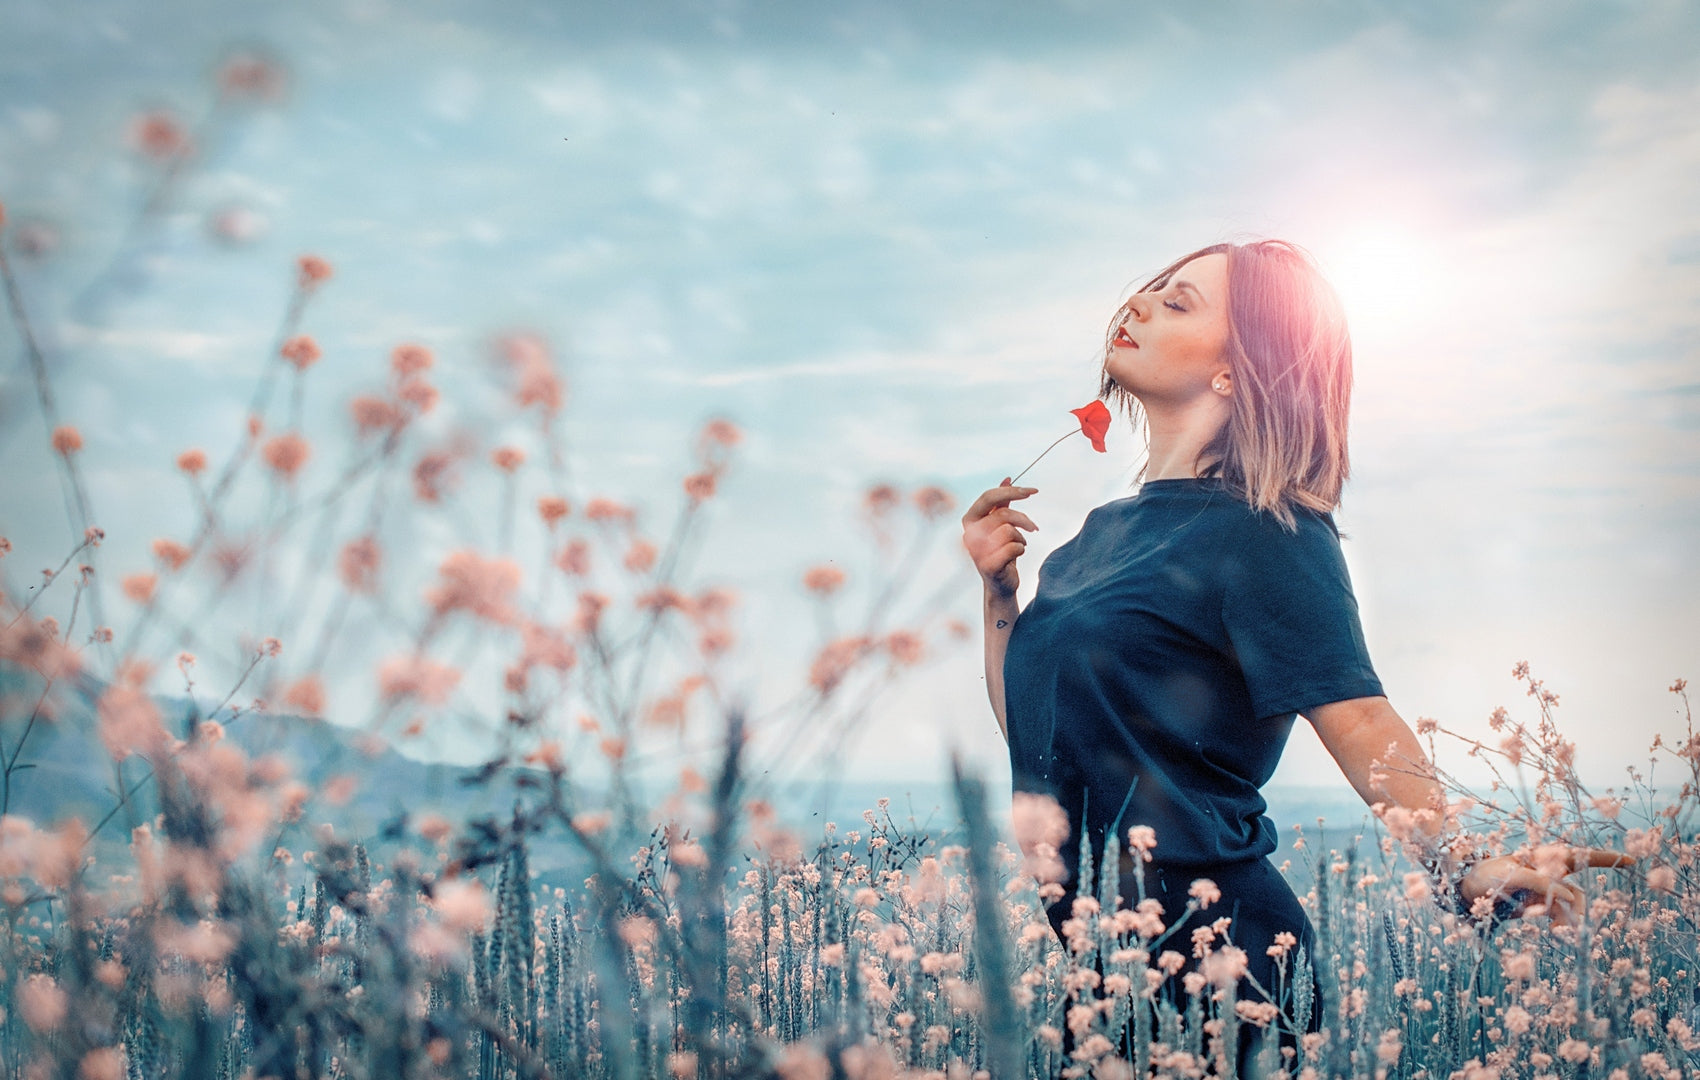 woman in a field full of flowers enjoying the nature without effects of stress on the body